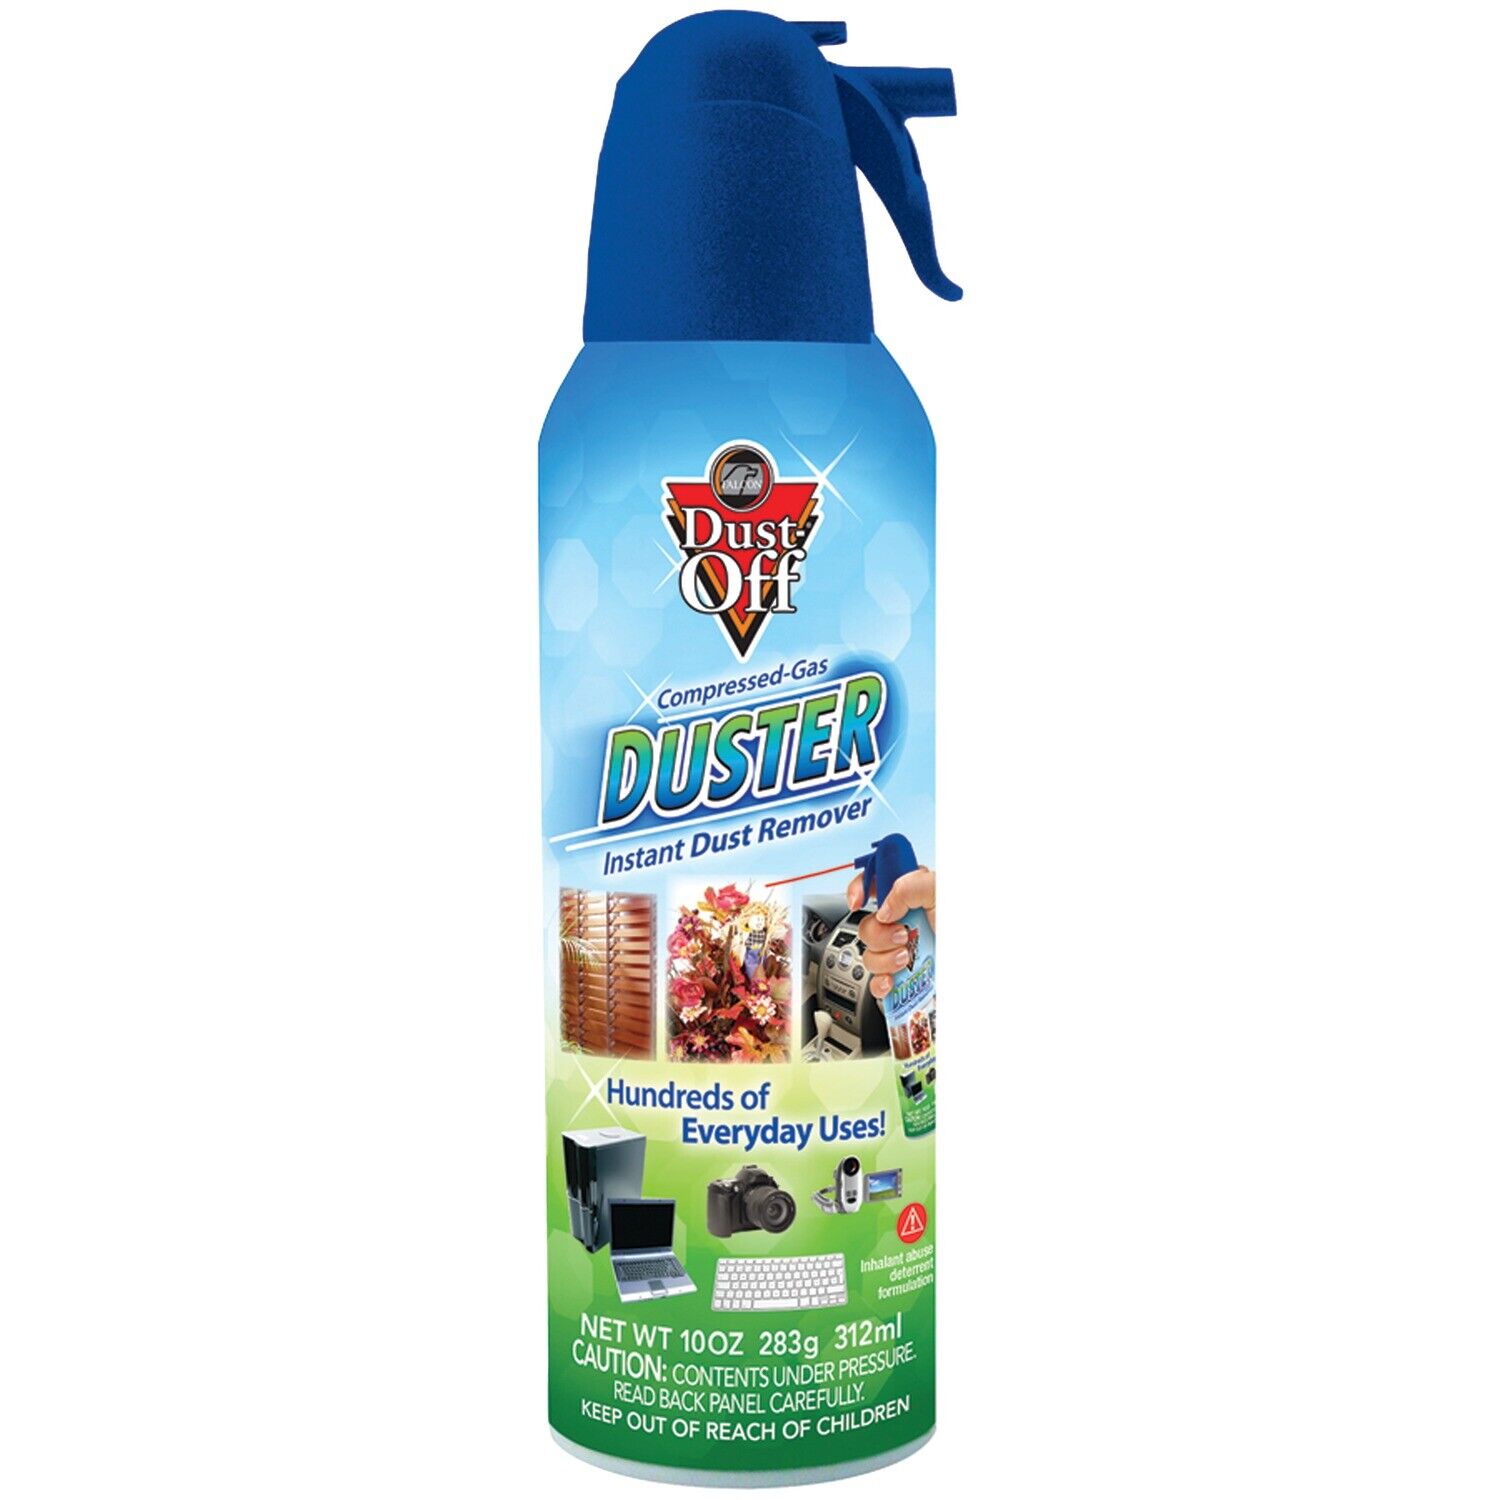 Dust-off Ret10521 Compressed Gas Duster (single) (multicolored)